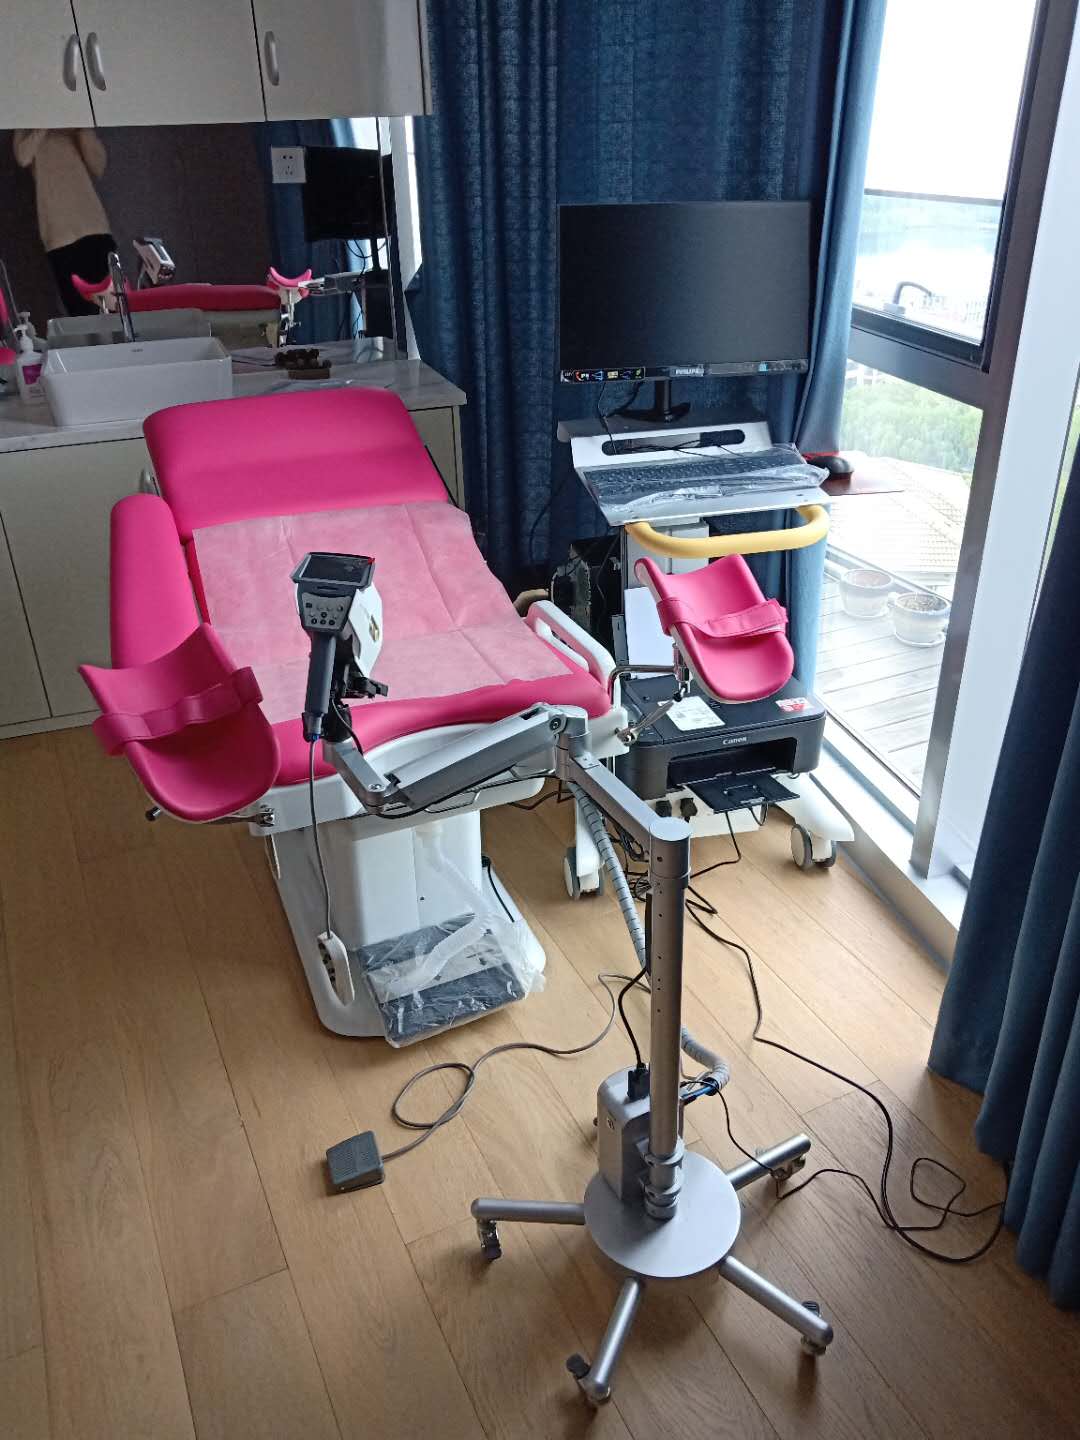 Do You Want to Know about Colposcopy?